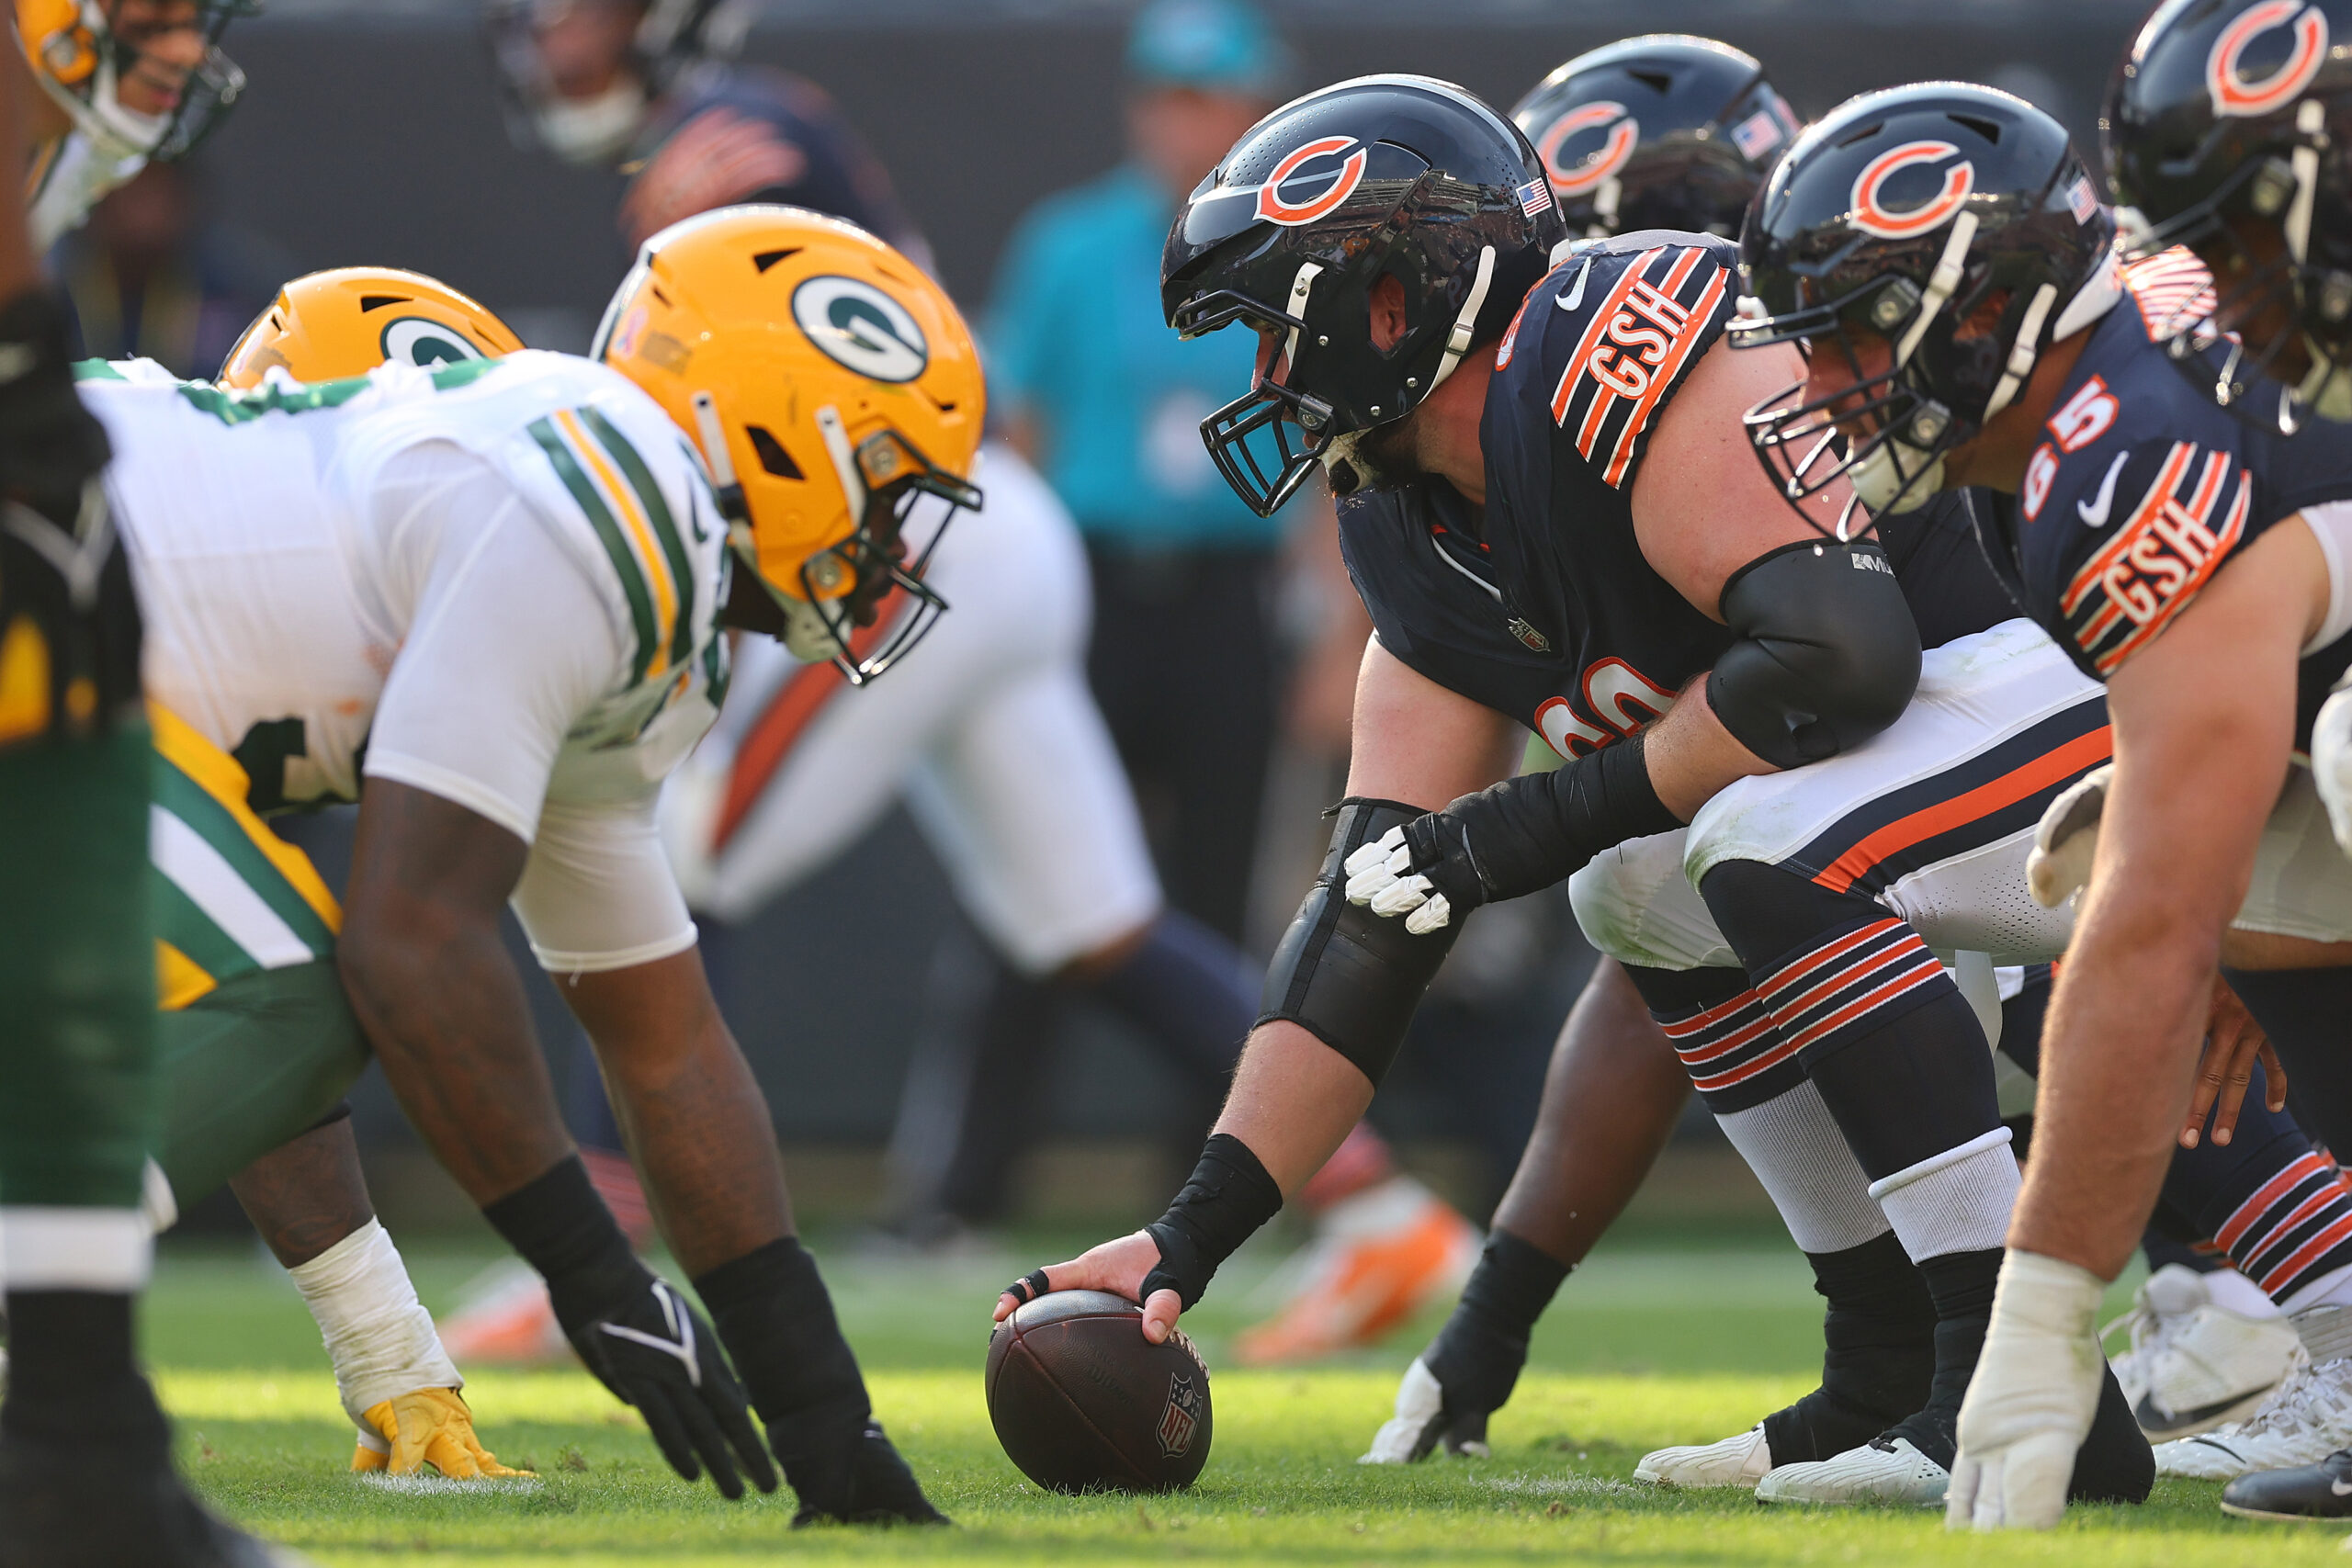 Photos from the Bears’ Week 1 loss vs. Packers